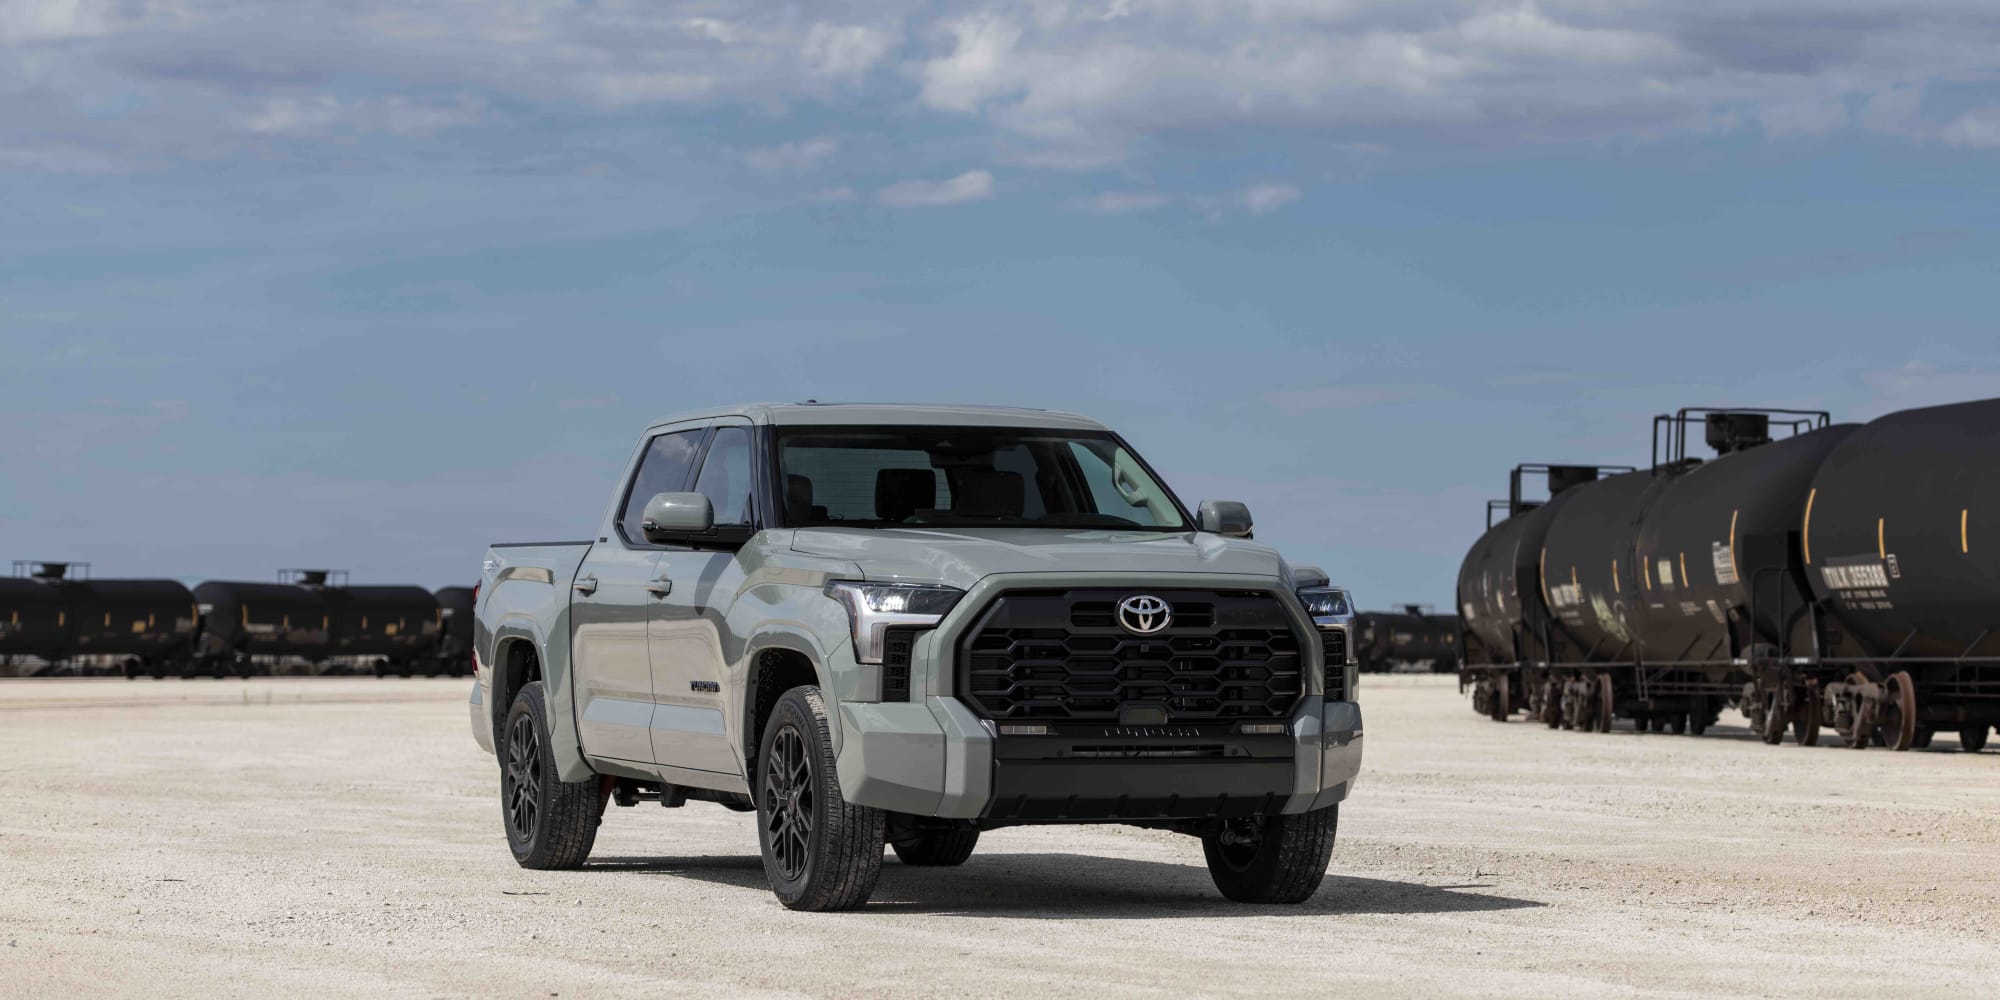 Toyota Tacoma Vs Tundra Which Pickup Is Better Motorborne